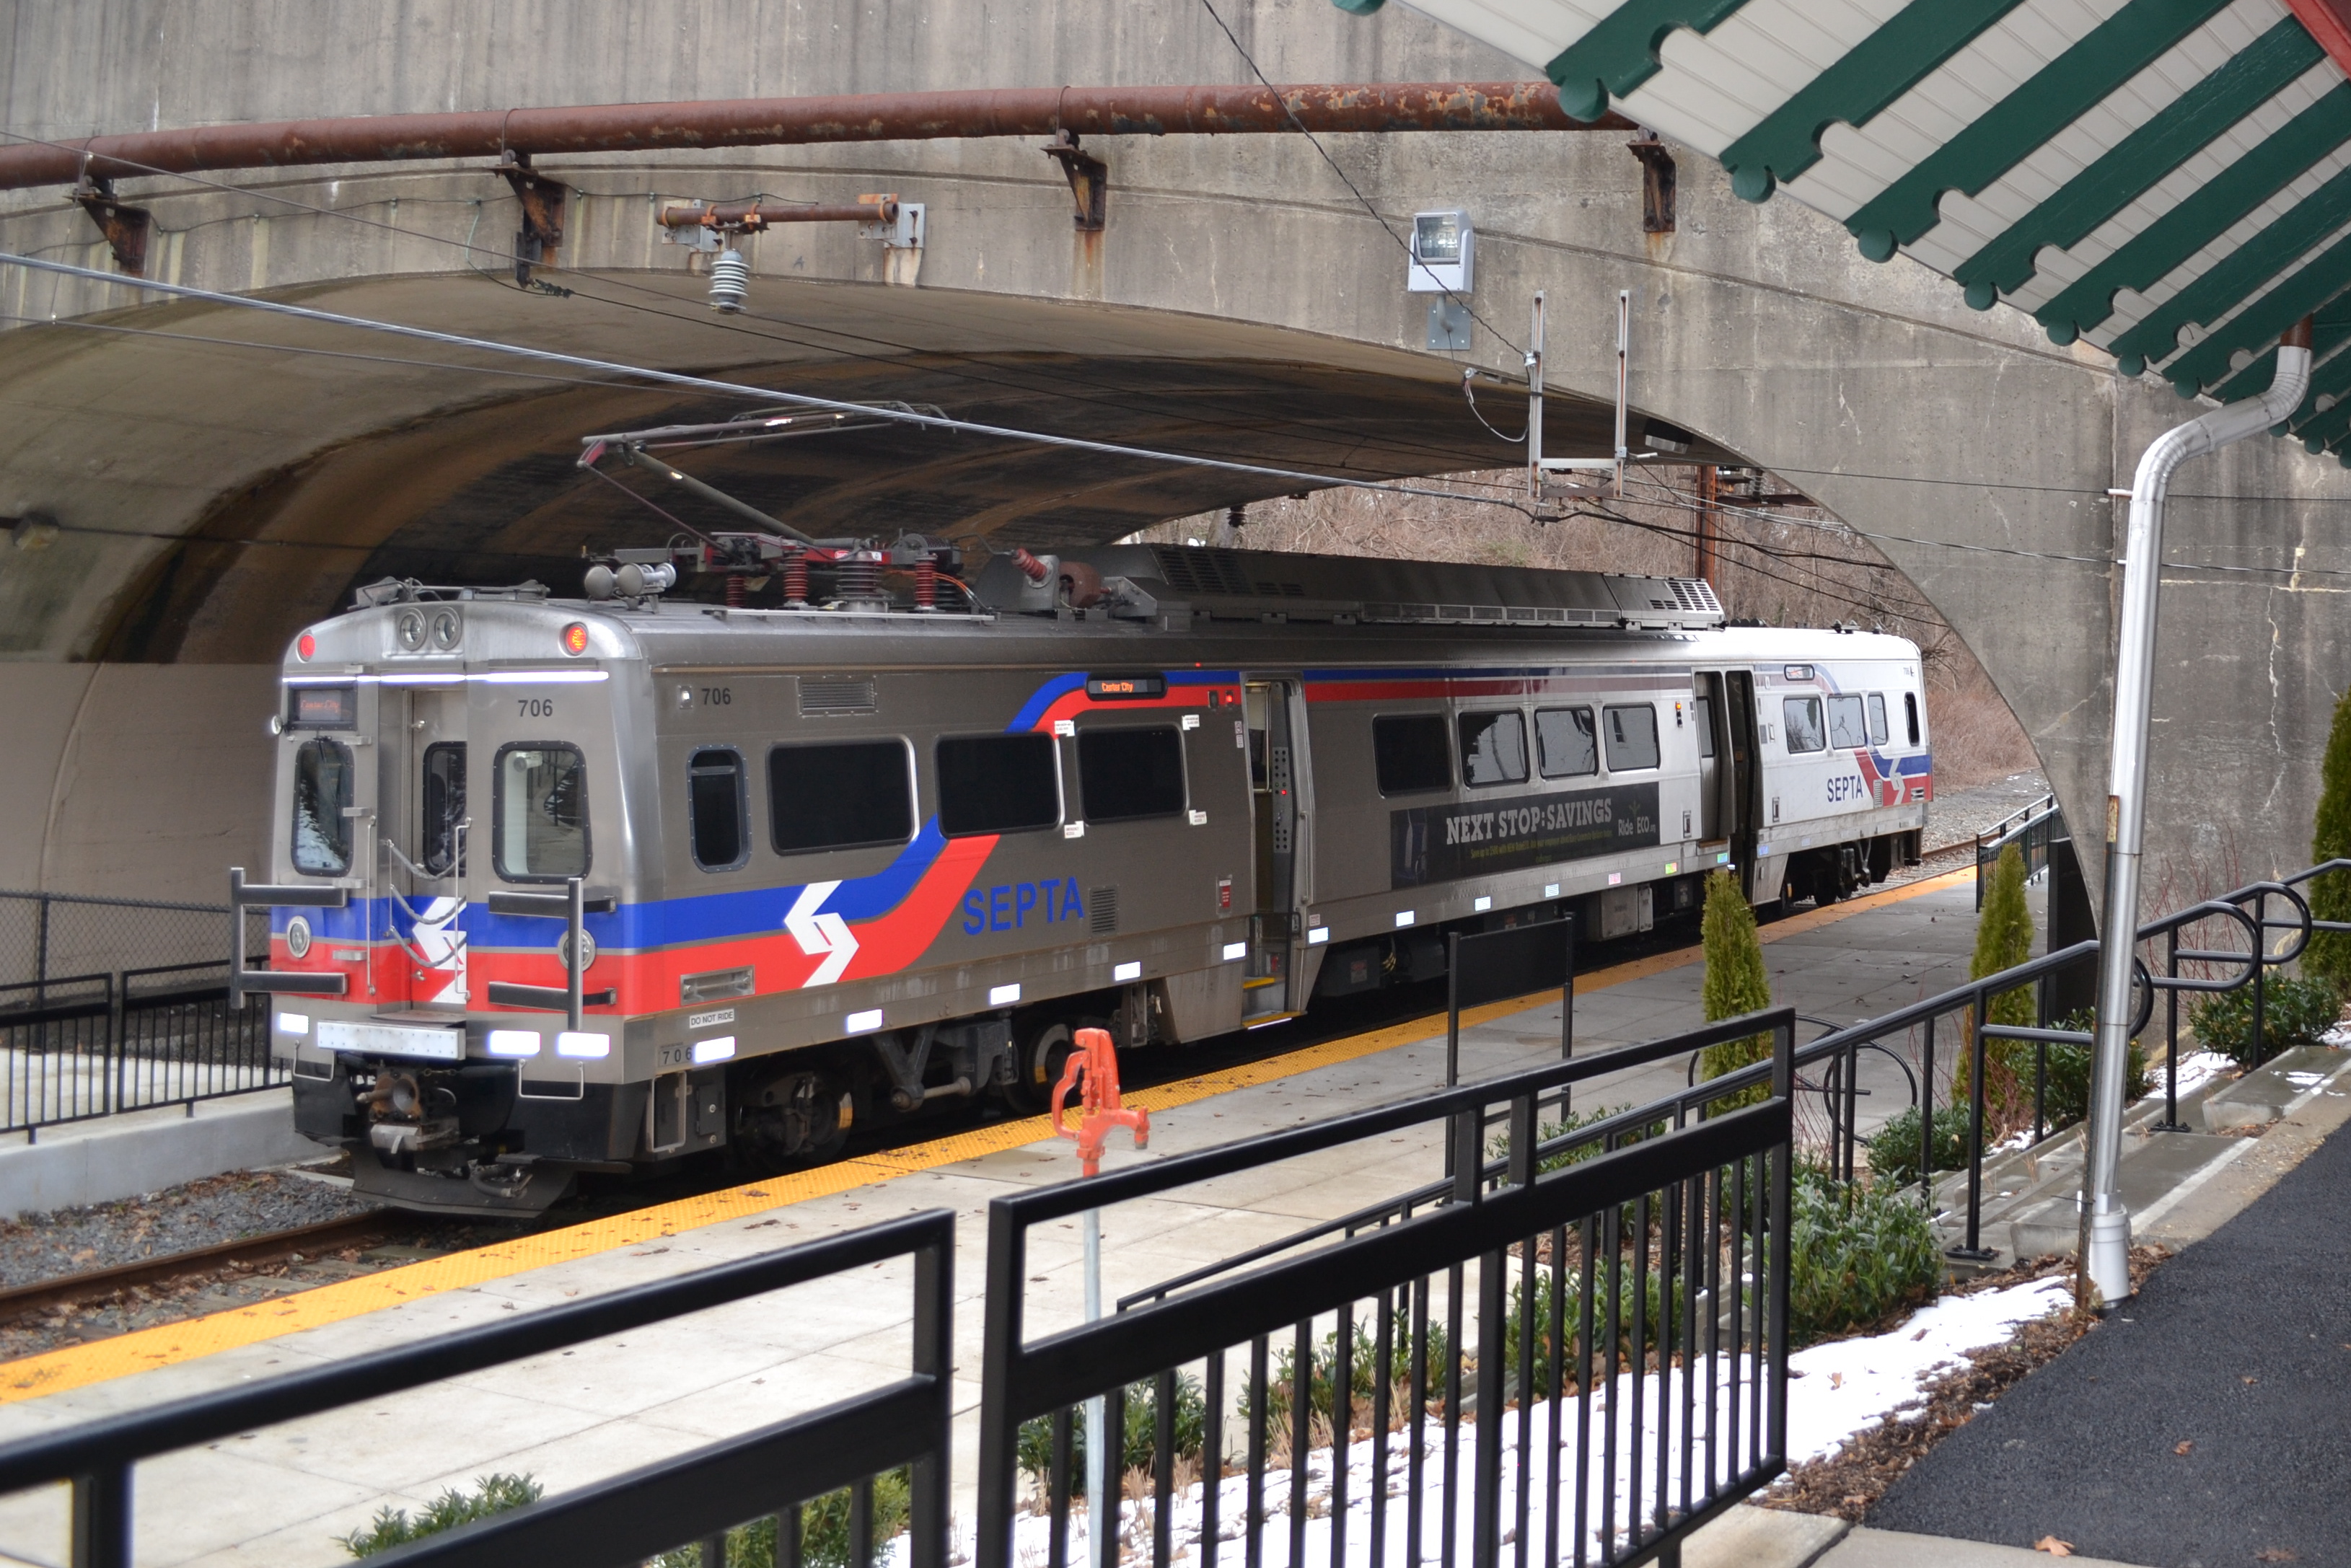 SEPTA's new Silverliner V cars helped boost on-time performance